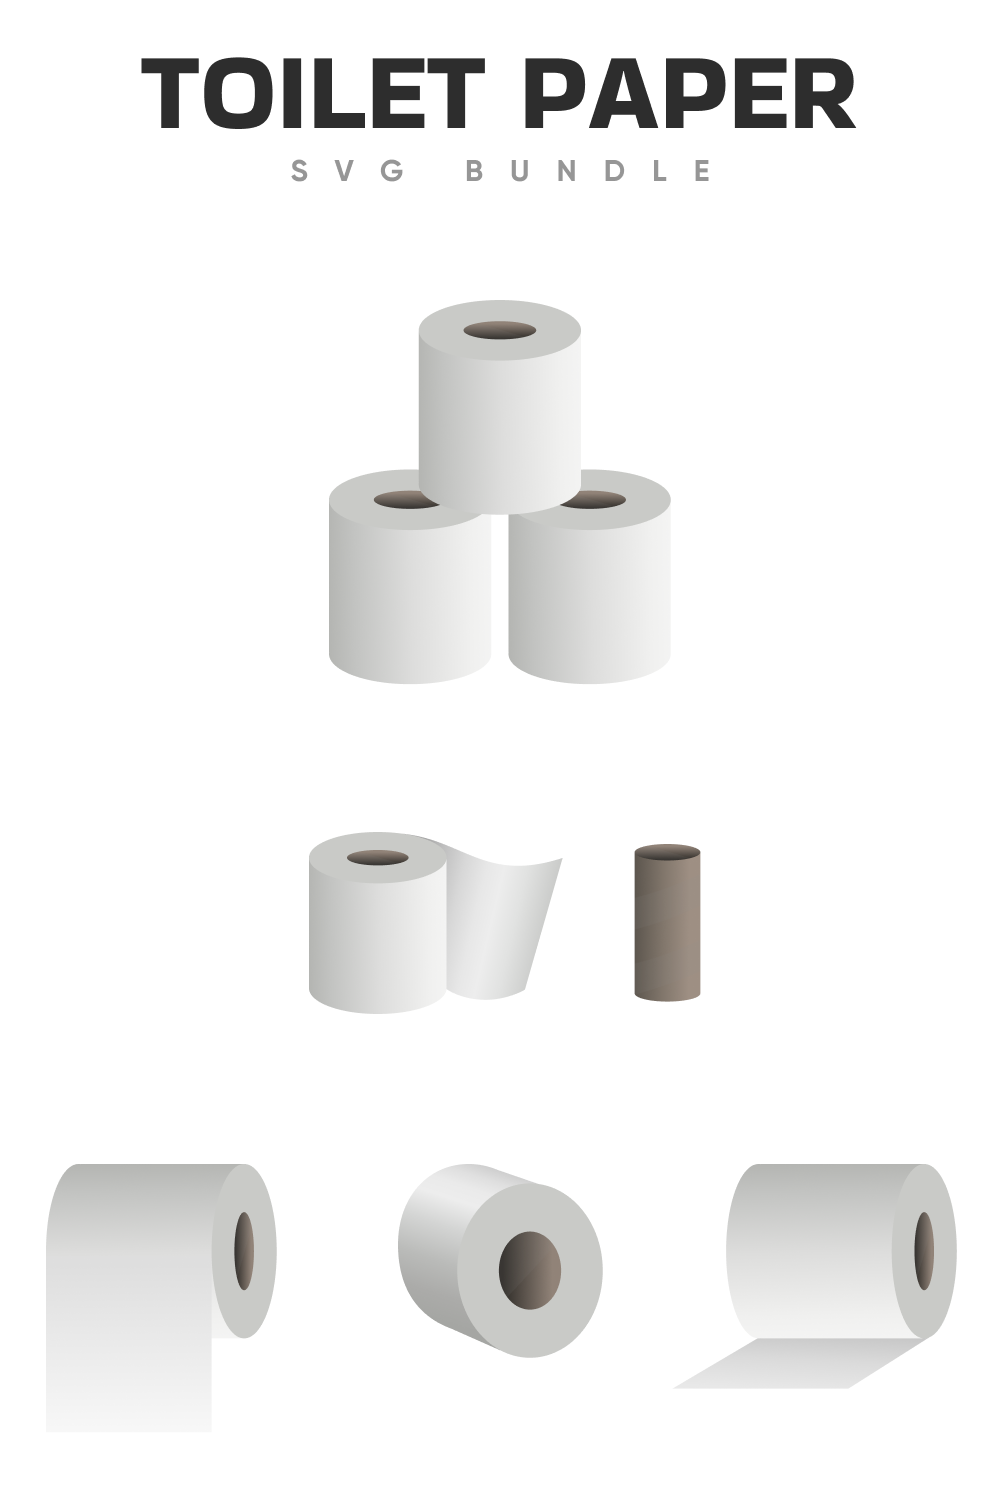 Some options of the toilet paper.